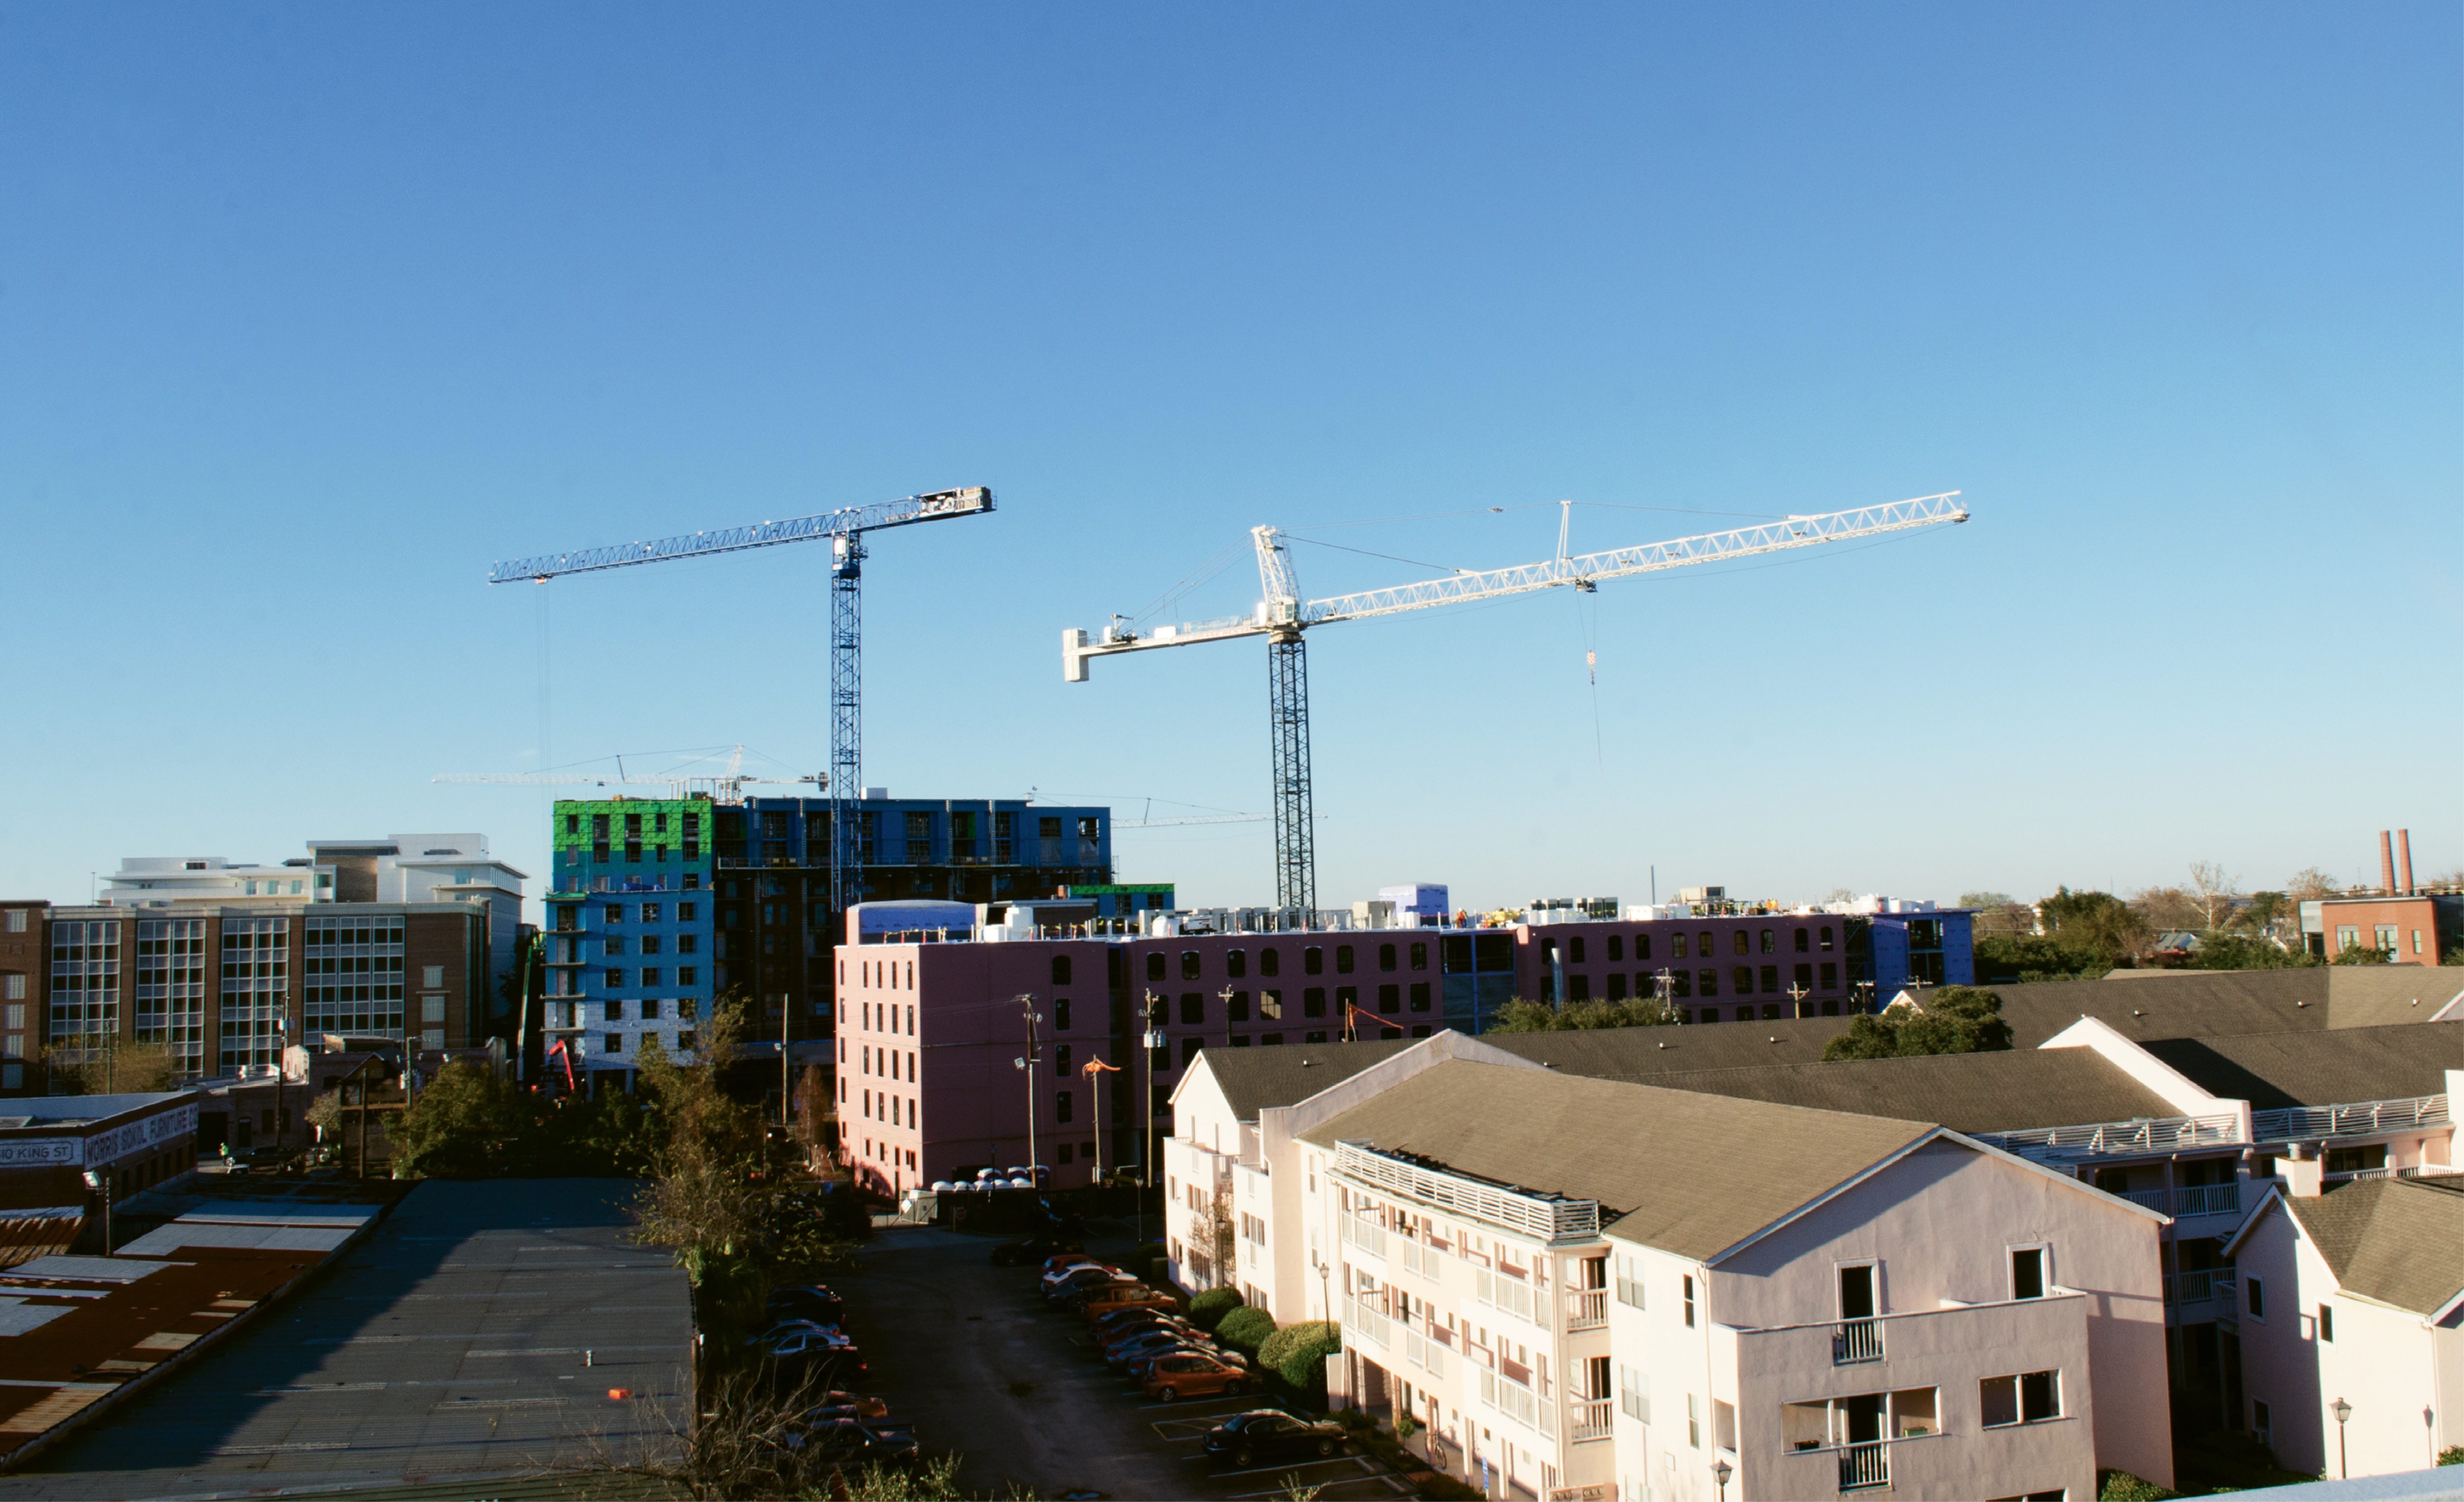 For a few years, construction cranes have dominated the downtown skyline. At right is the Courtyards at 411 Meeting Street complex, under-market rental apartments that are slated to become a 300-room hotel.